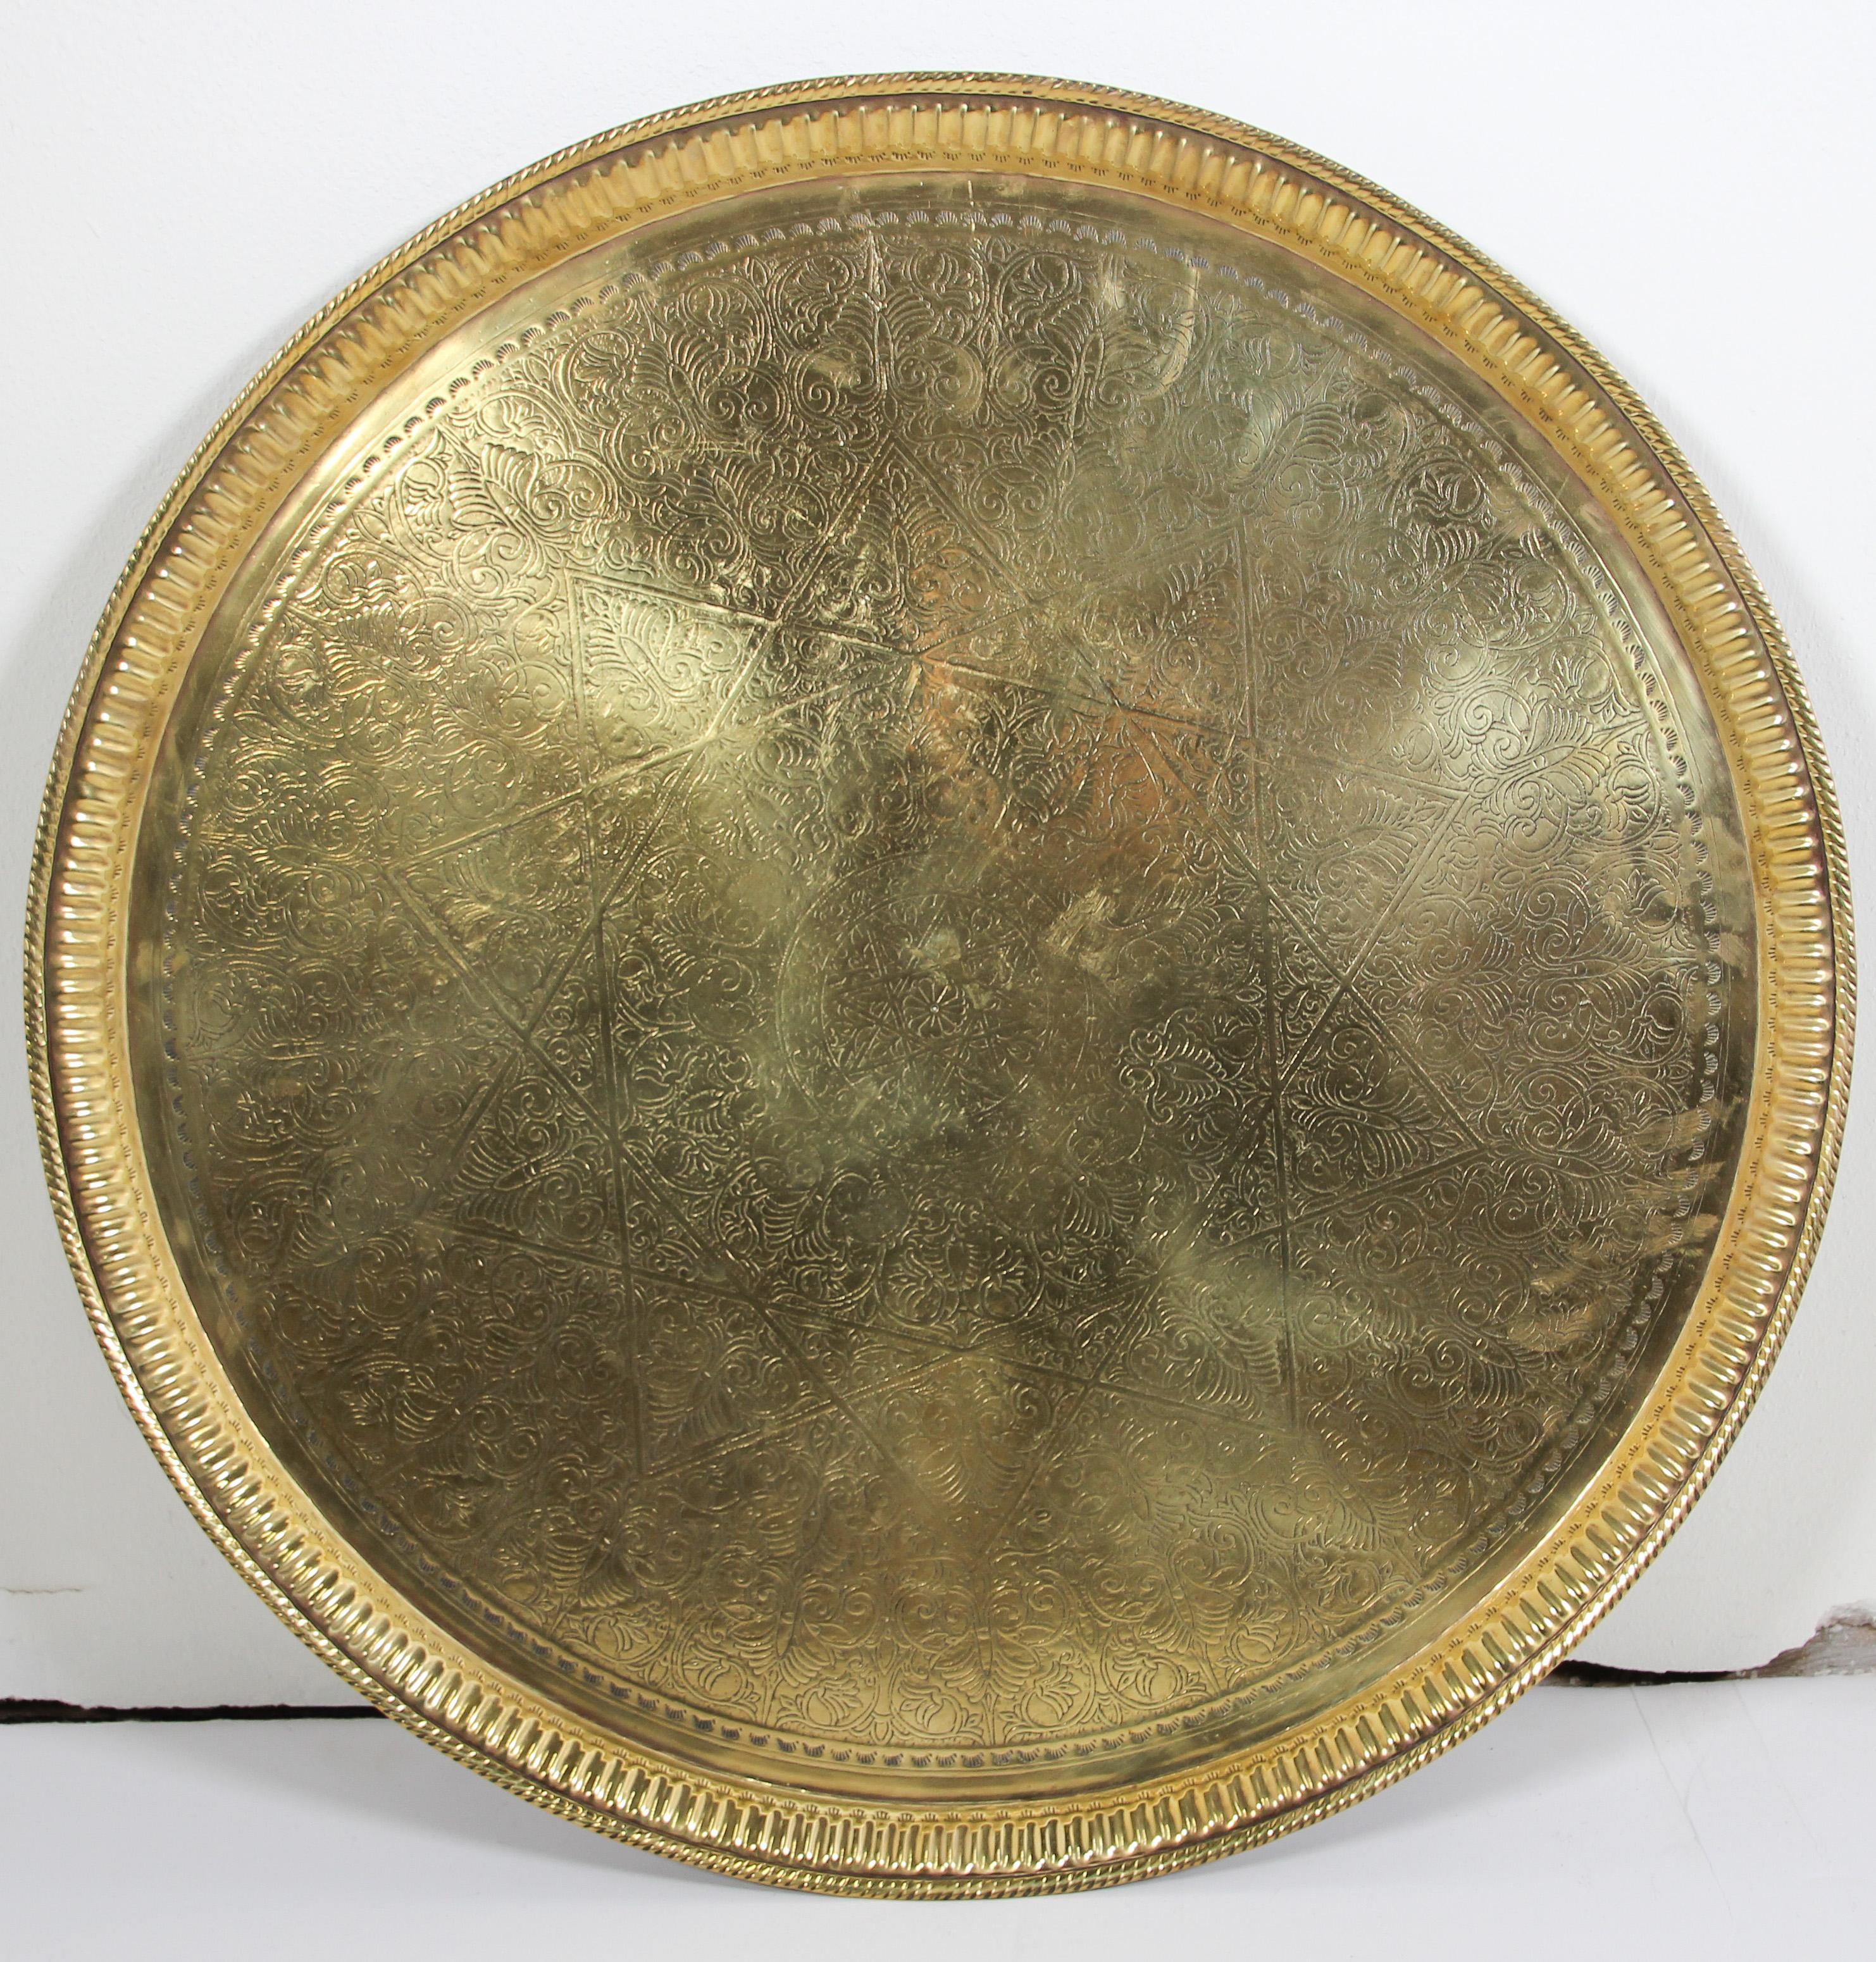 Moroccan antique round brass tray.
The handcrafted circular brass metal platter is decorated and hammered with Islamic Moorish designs.
Heavy brass plate with very Fine hand chased floral and geometric Arabic designs.
Measures: Diameter